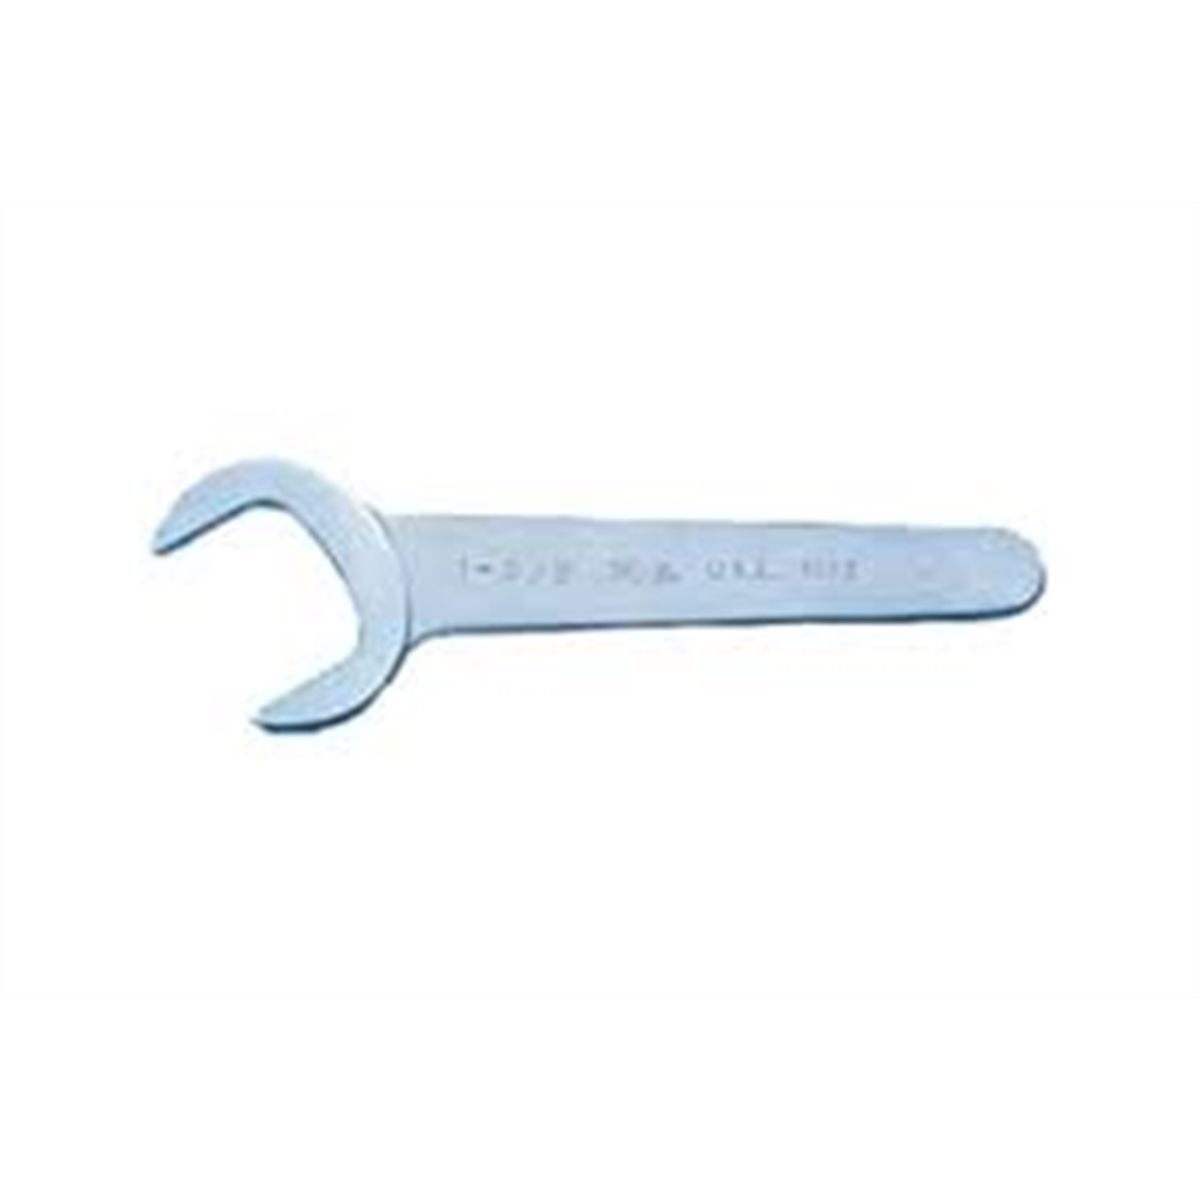 Chrome Service Wrench 30 Deg Angle - 1-5/8 In...